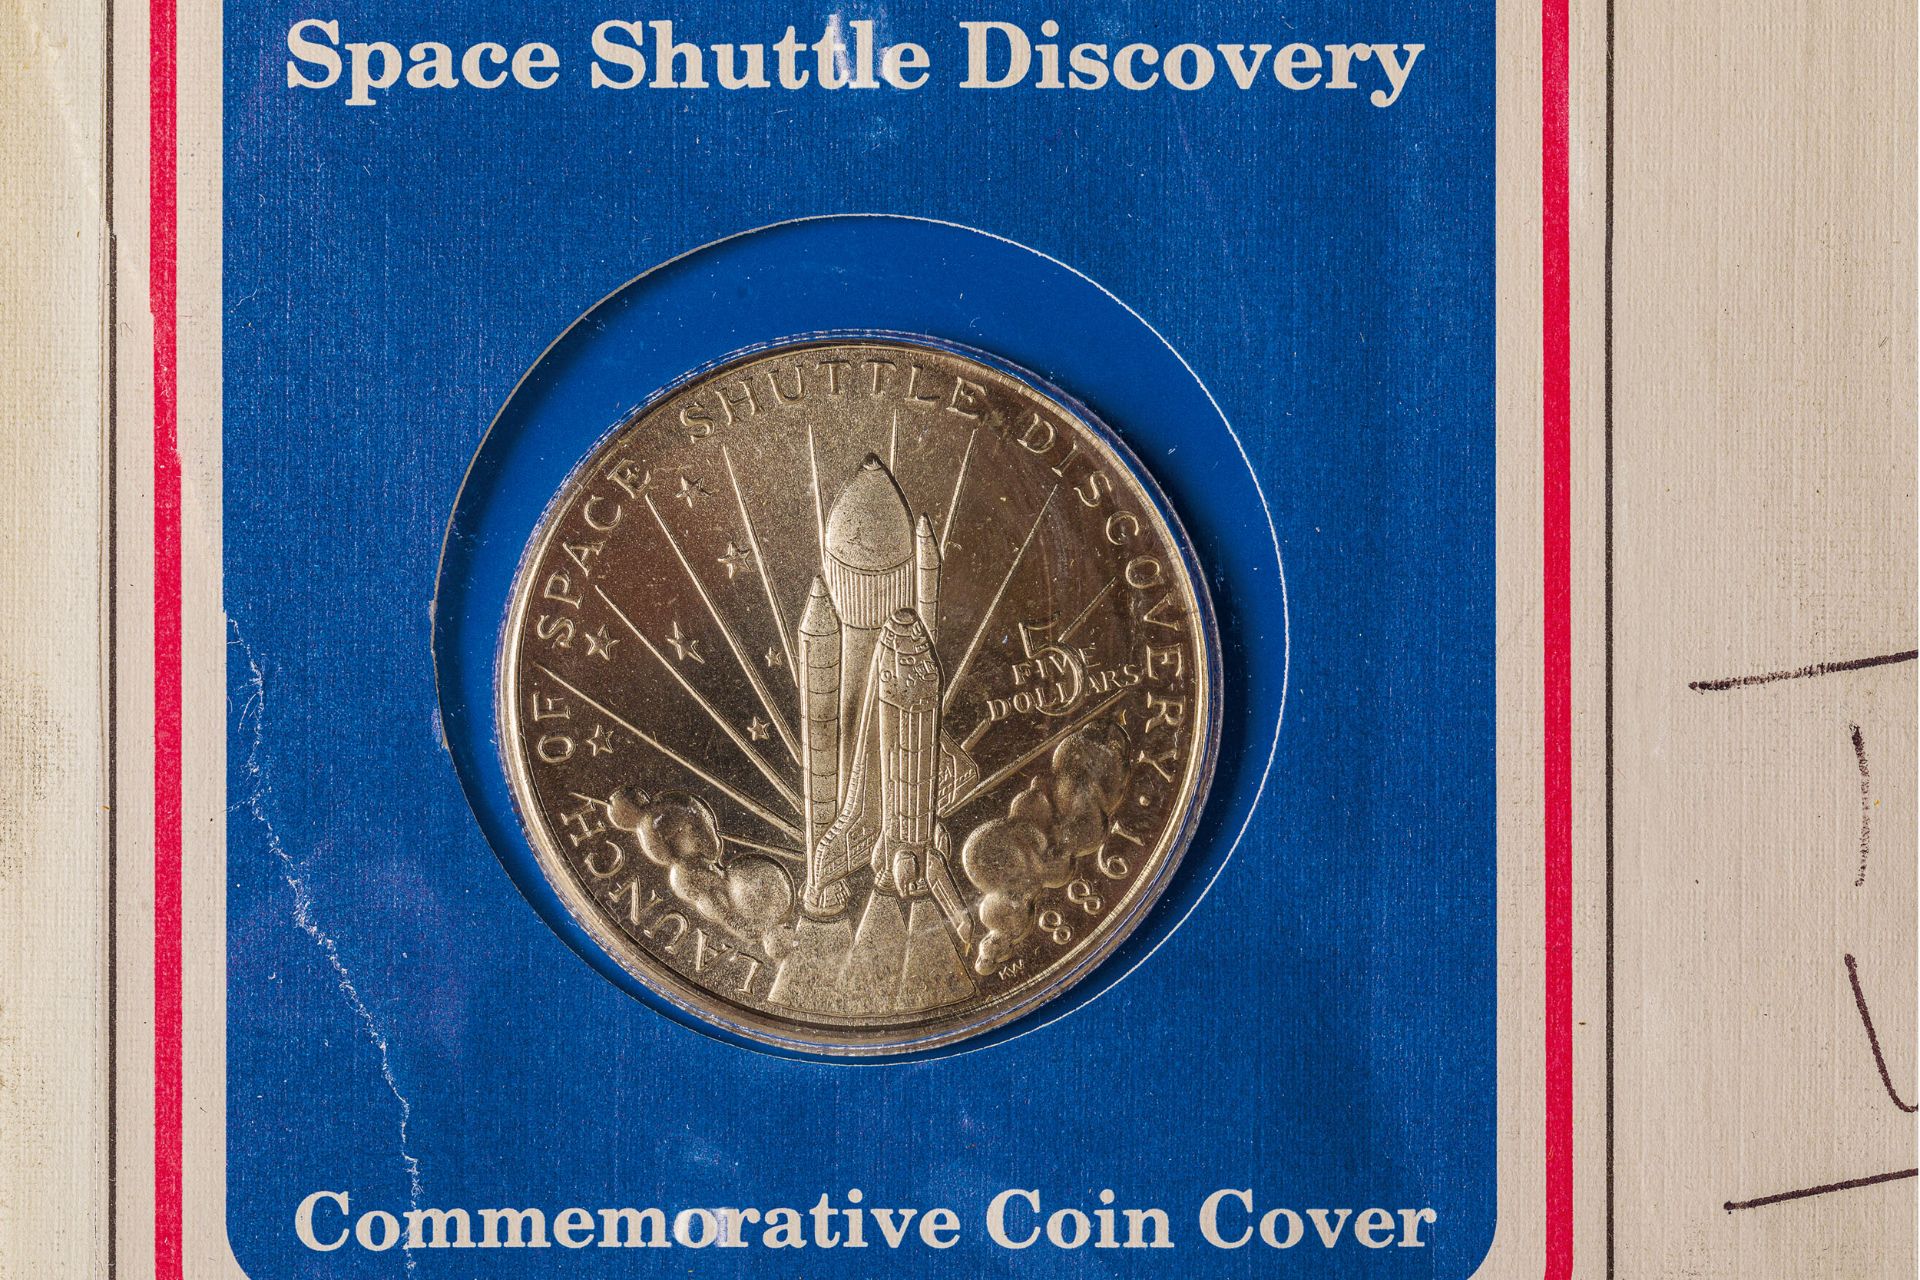 SPACE SHUTTLE DISCOVERY COMMEMORATIVE COIN COVER, KENNEDY SPACE CENTER, 1988 - Bild 2 aus 5